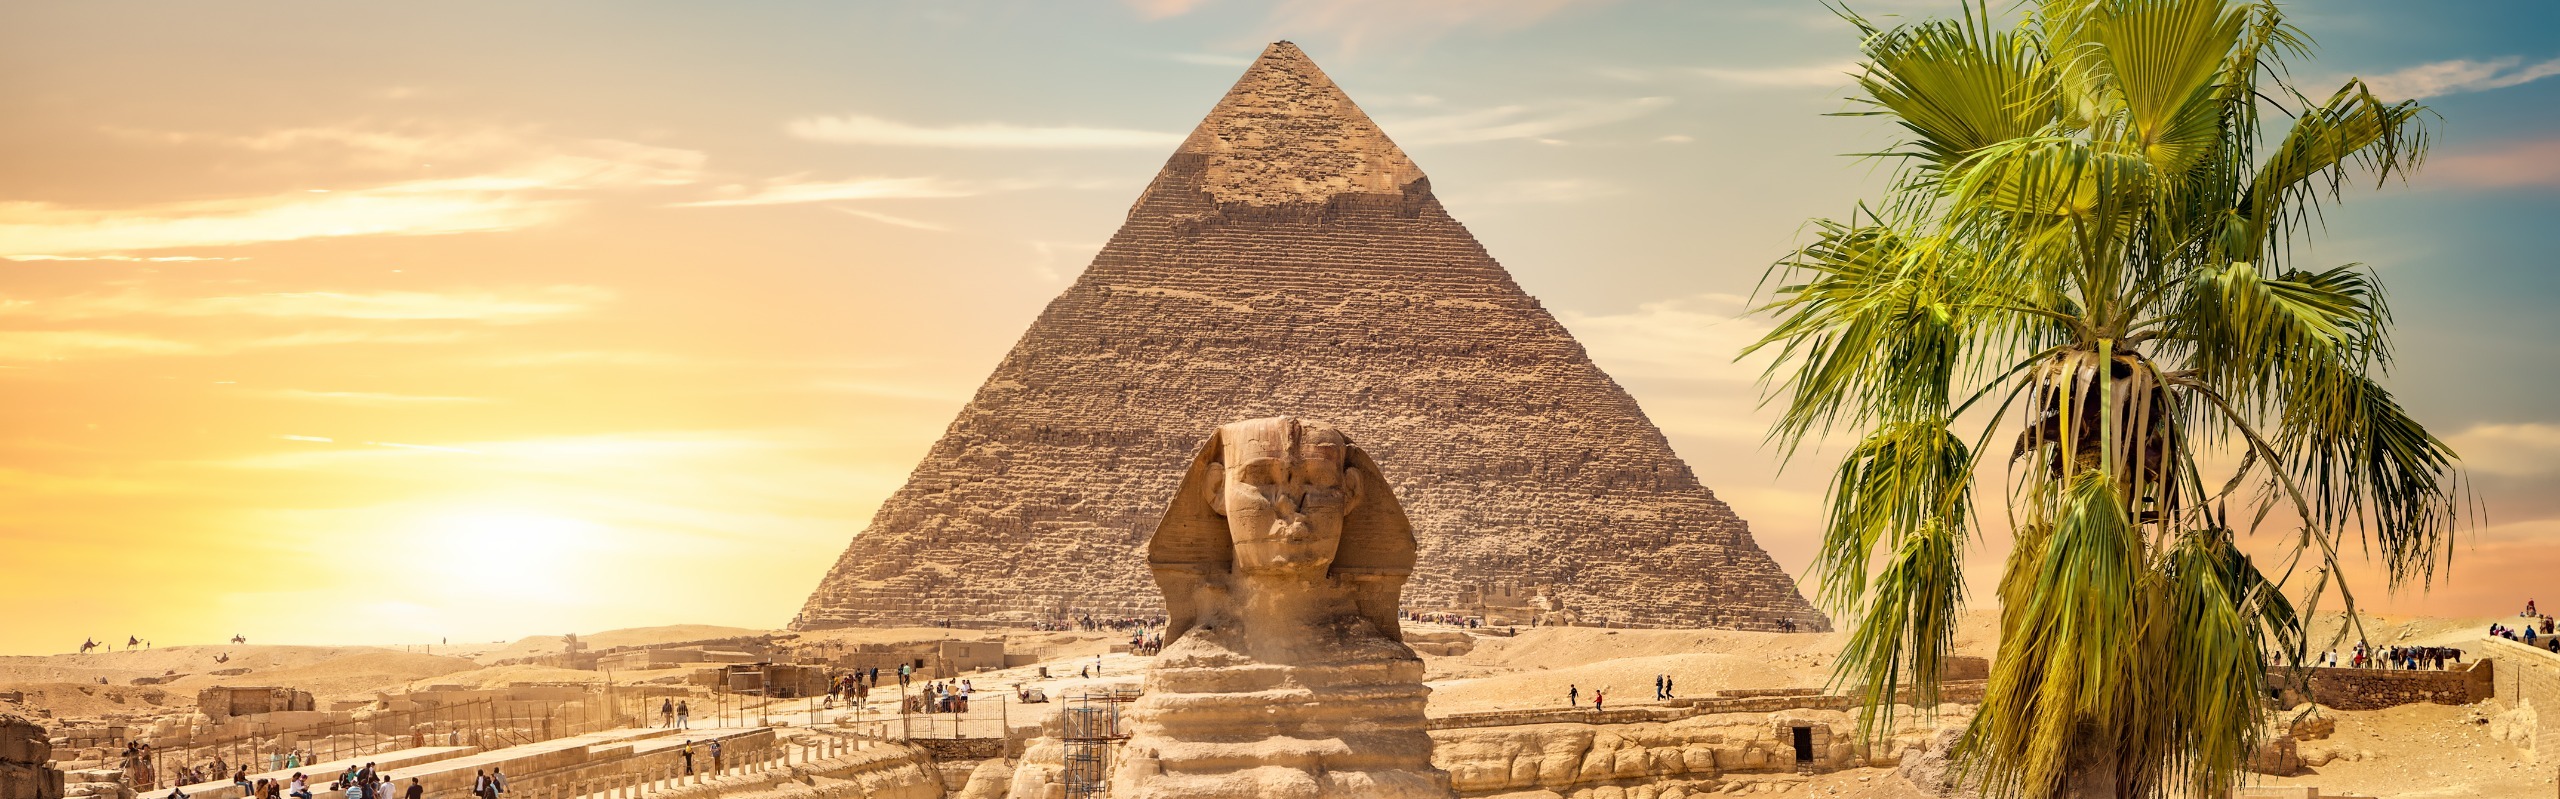 The Top 10 Egyptian Monuments (From Pyramids to Temples)